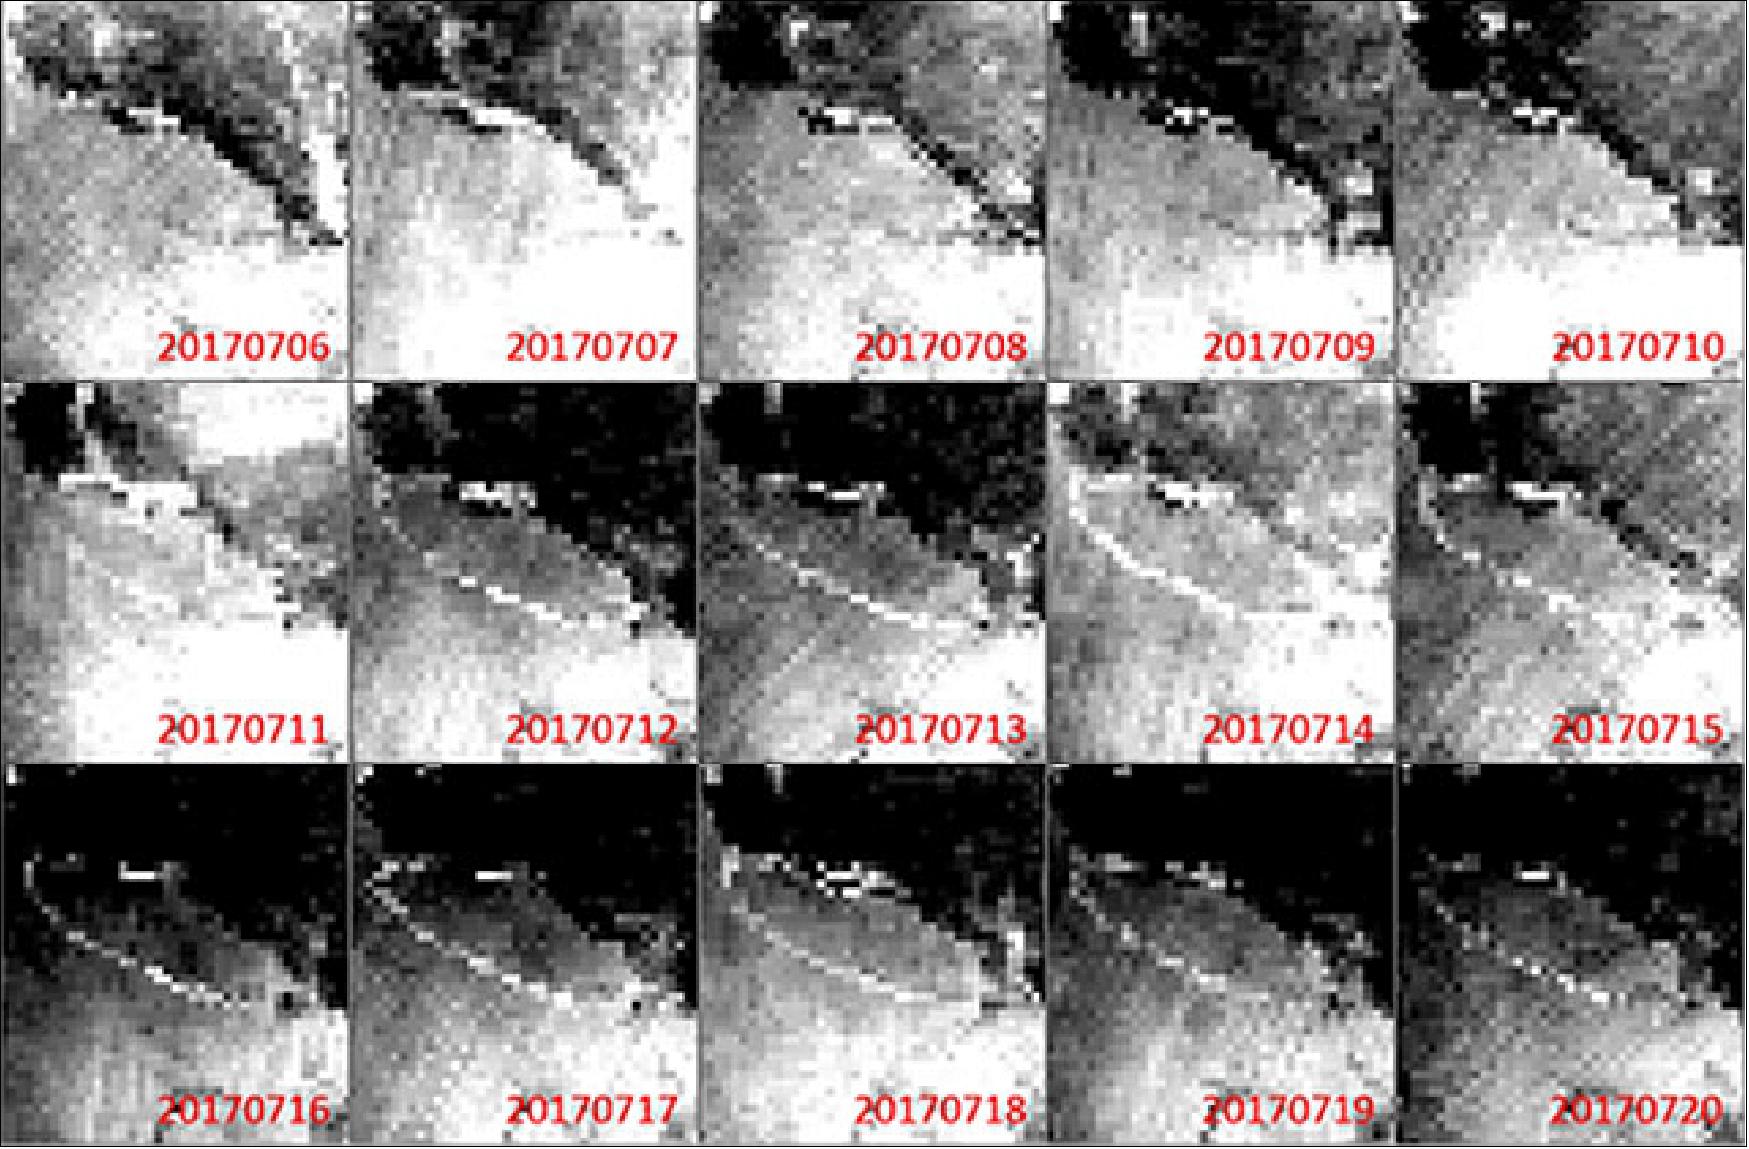 Figure 12: AMSR-2 observation sequence of the Larsen-C iceberg in the period July 6 to 20, 2017 (image credit: JAXA)